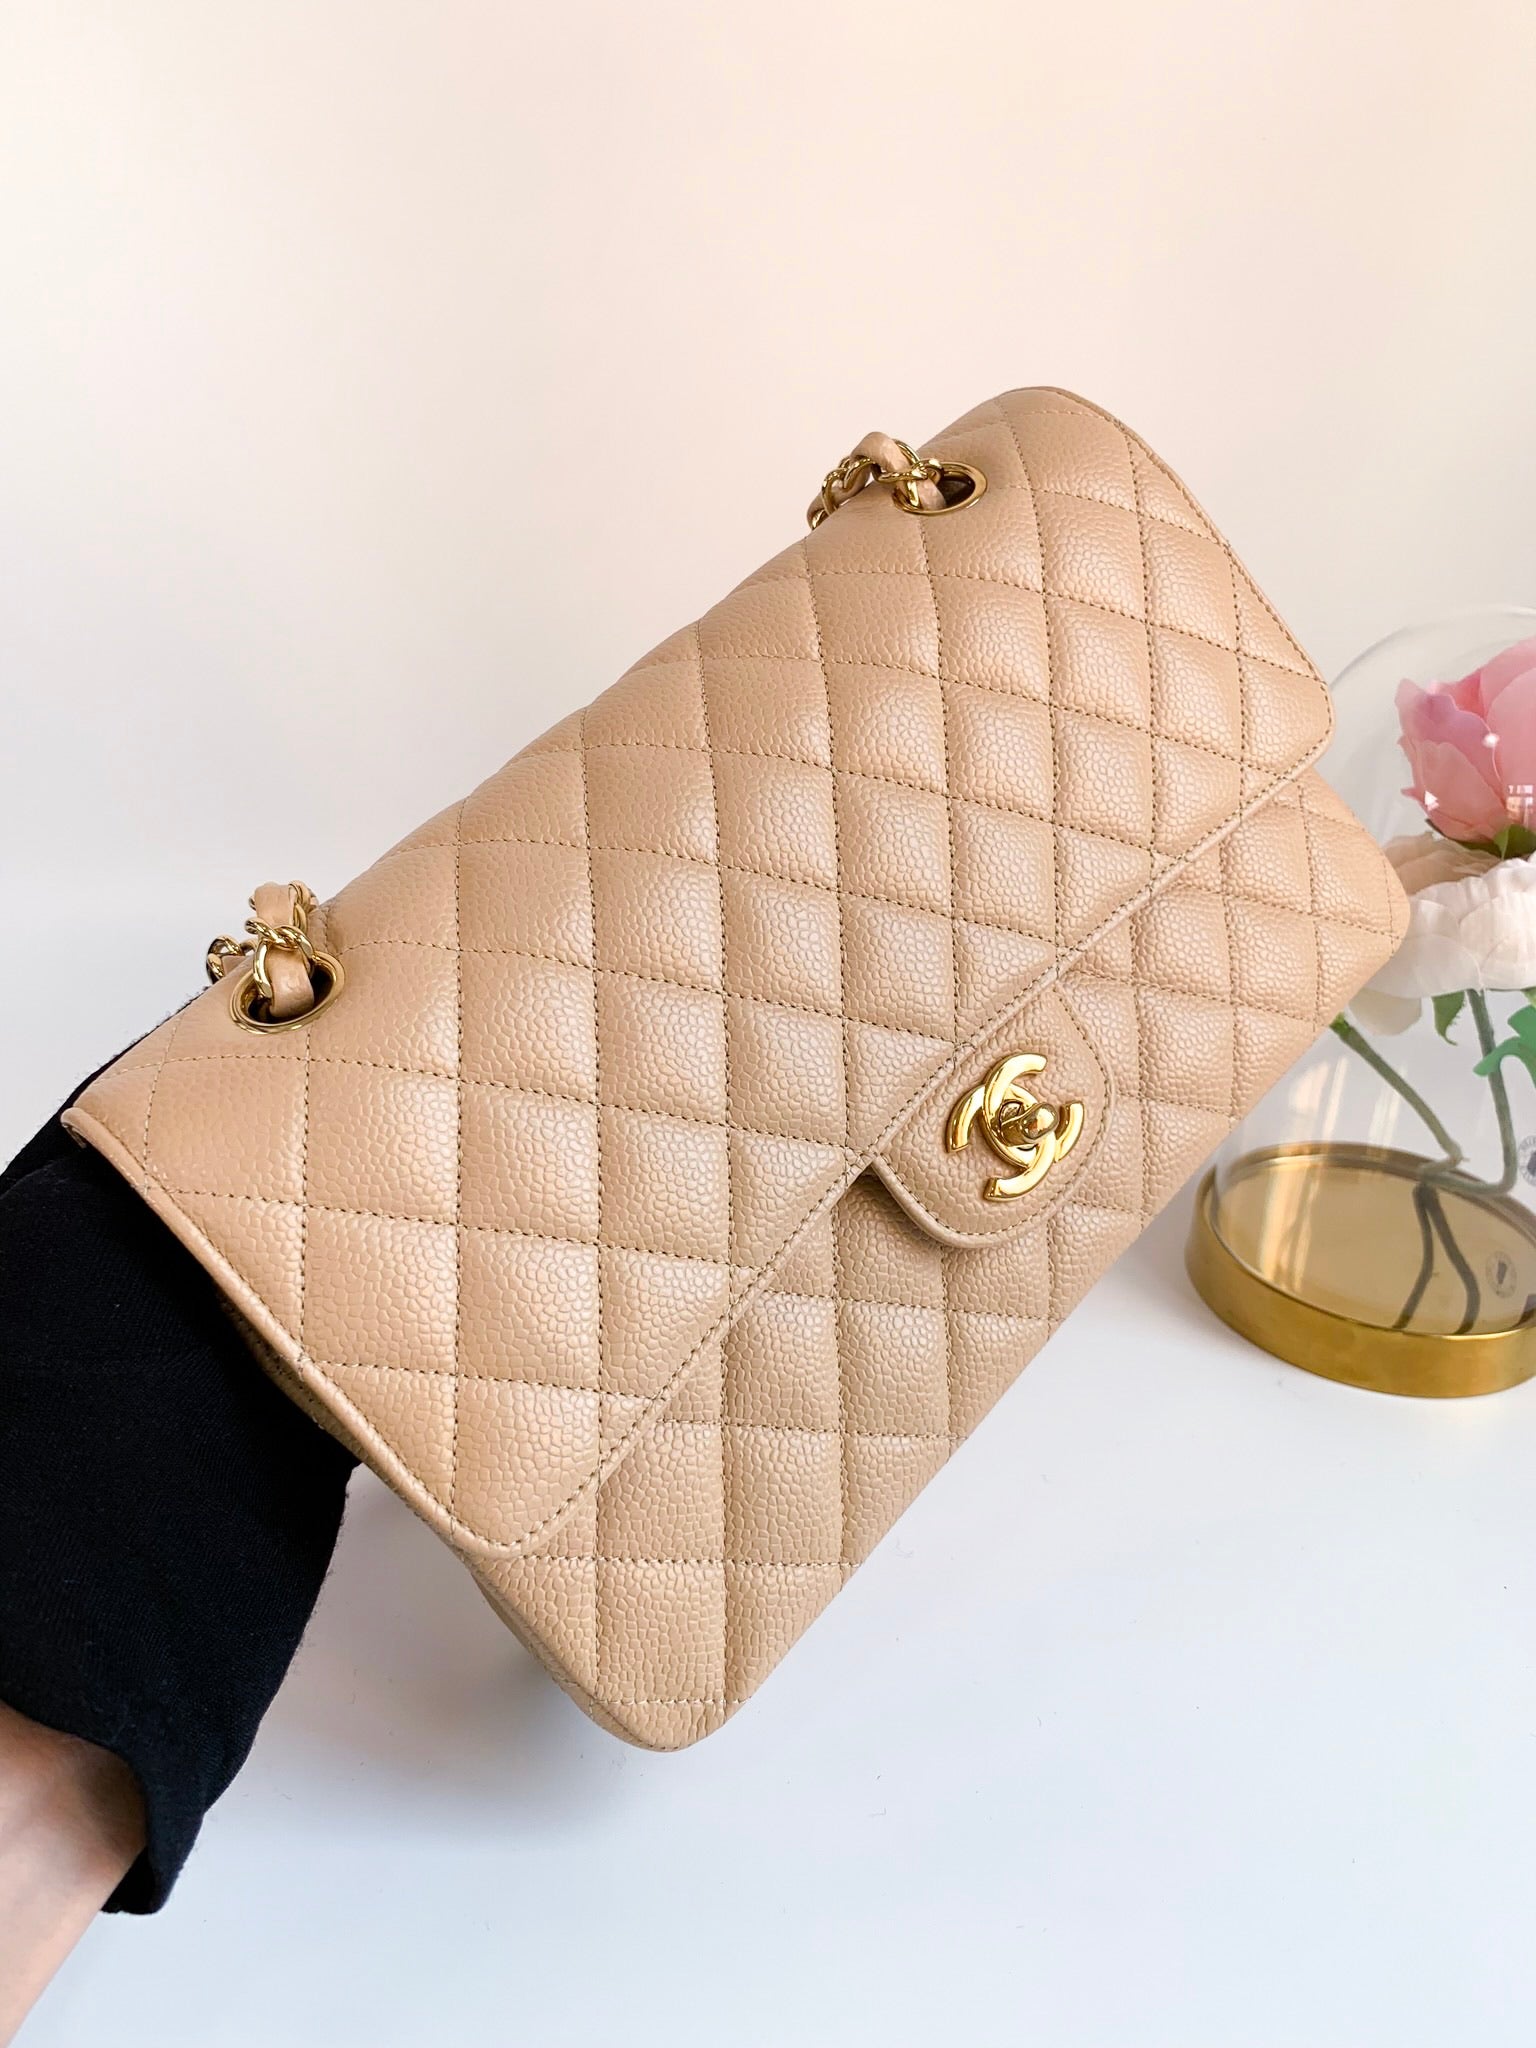 CHANEL Beige Clair Caviar Small Classic Flap Bag Gold Hardware